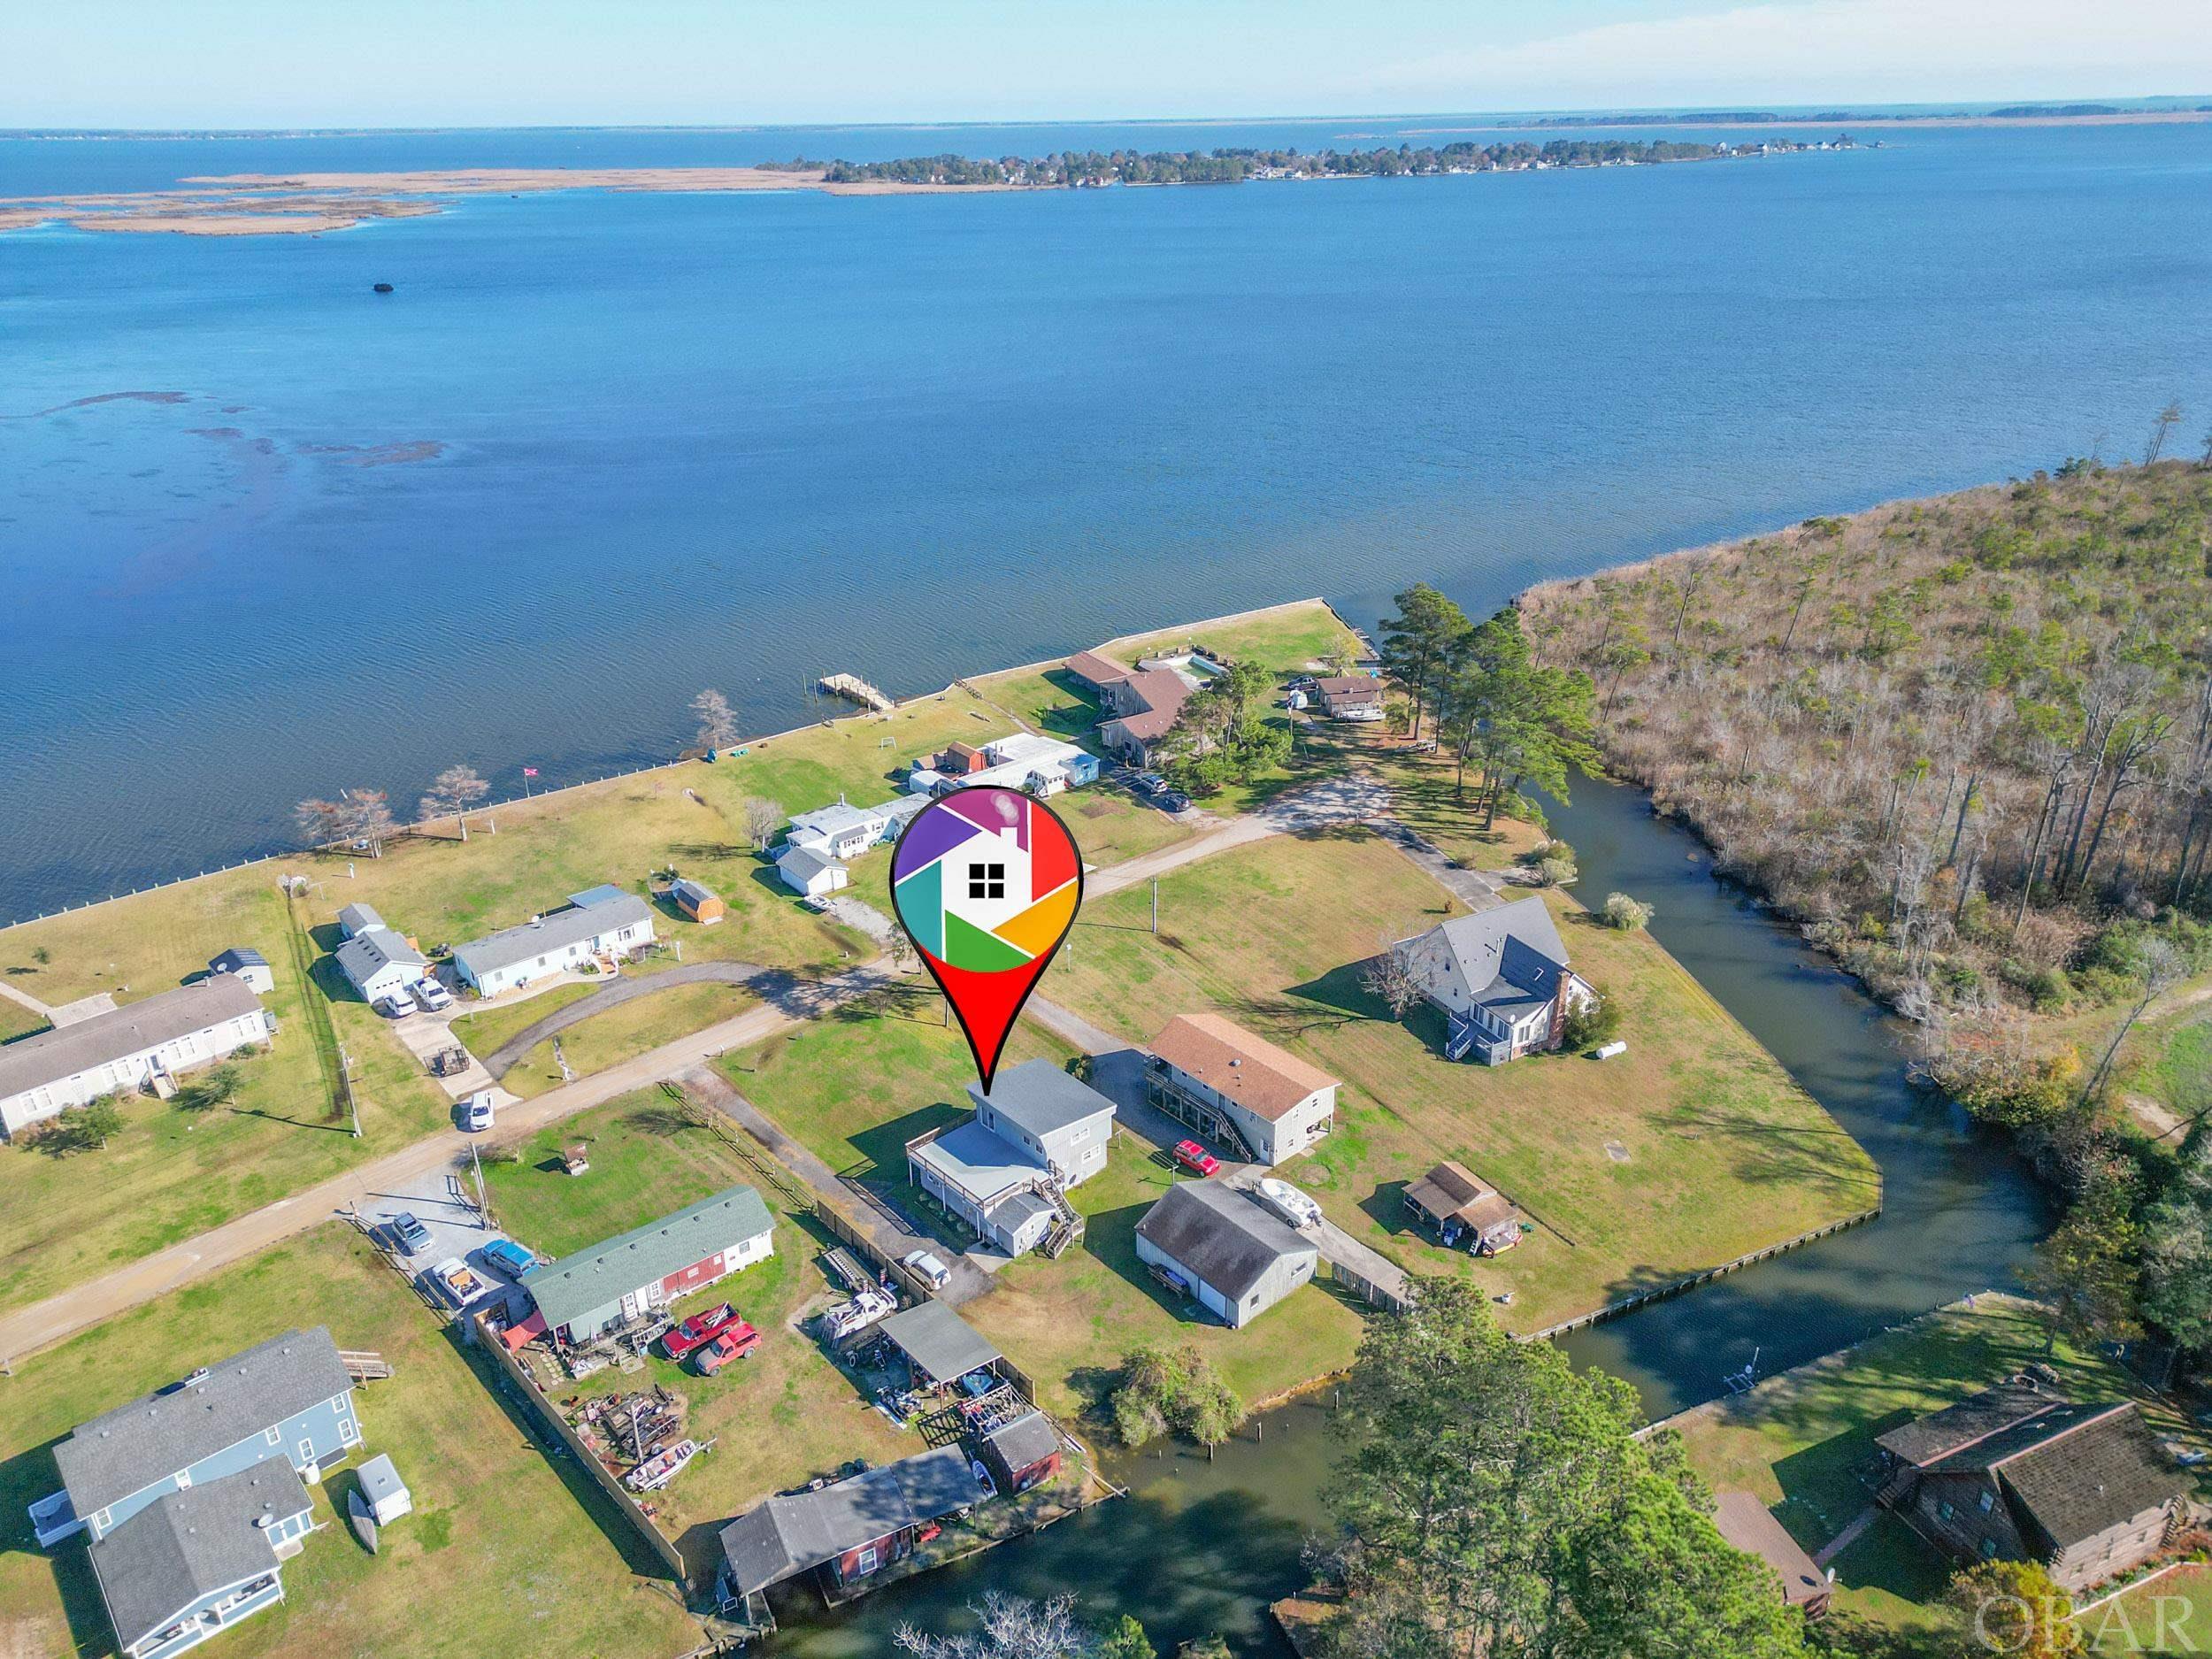 118 Womack Drive, Currituck, NC 27929, 3 Bedrooms Bedrooms, ,2 BathroomsBathrooms,Residential,For sale,Womack Drive,124568